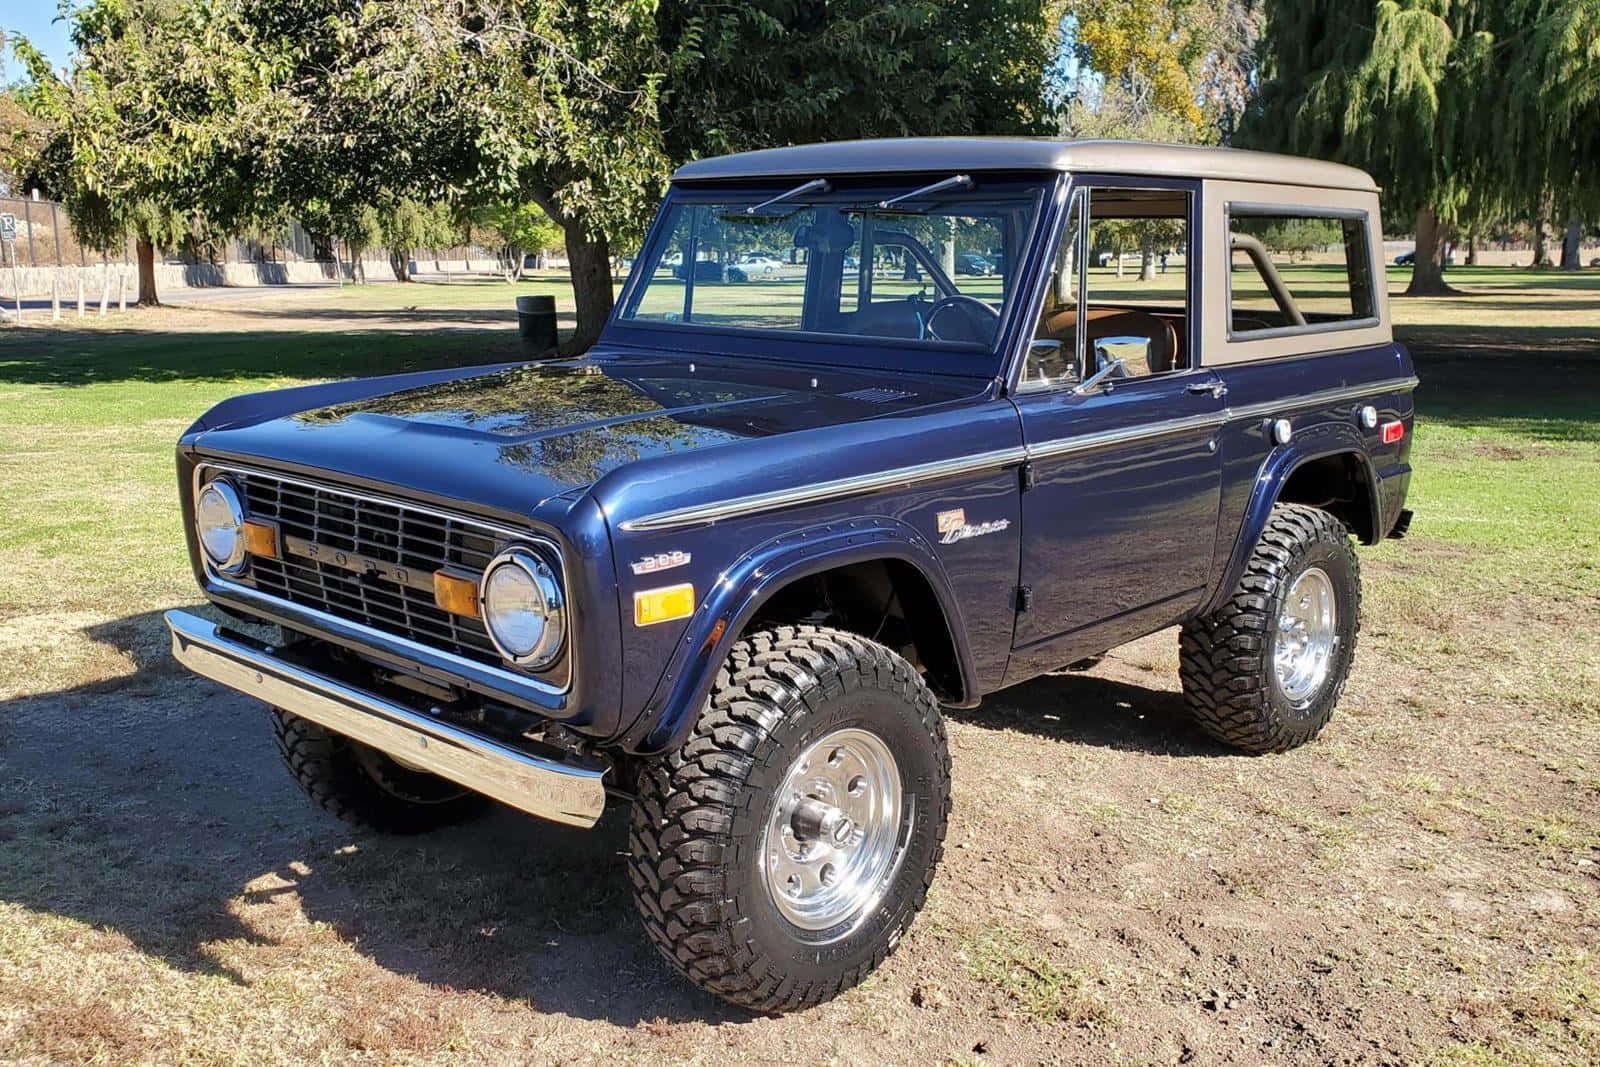 Ready to Explore with the Iconic Ford Bronco